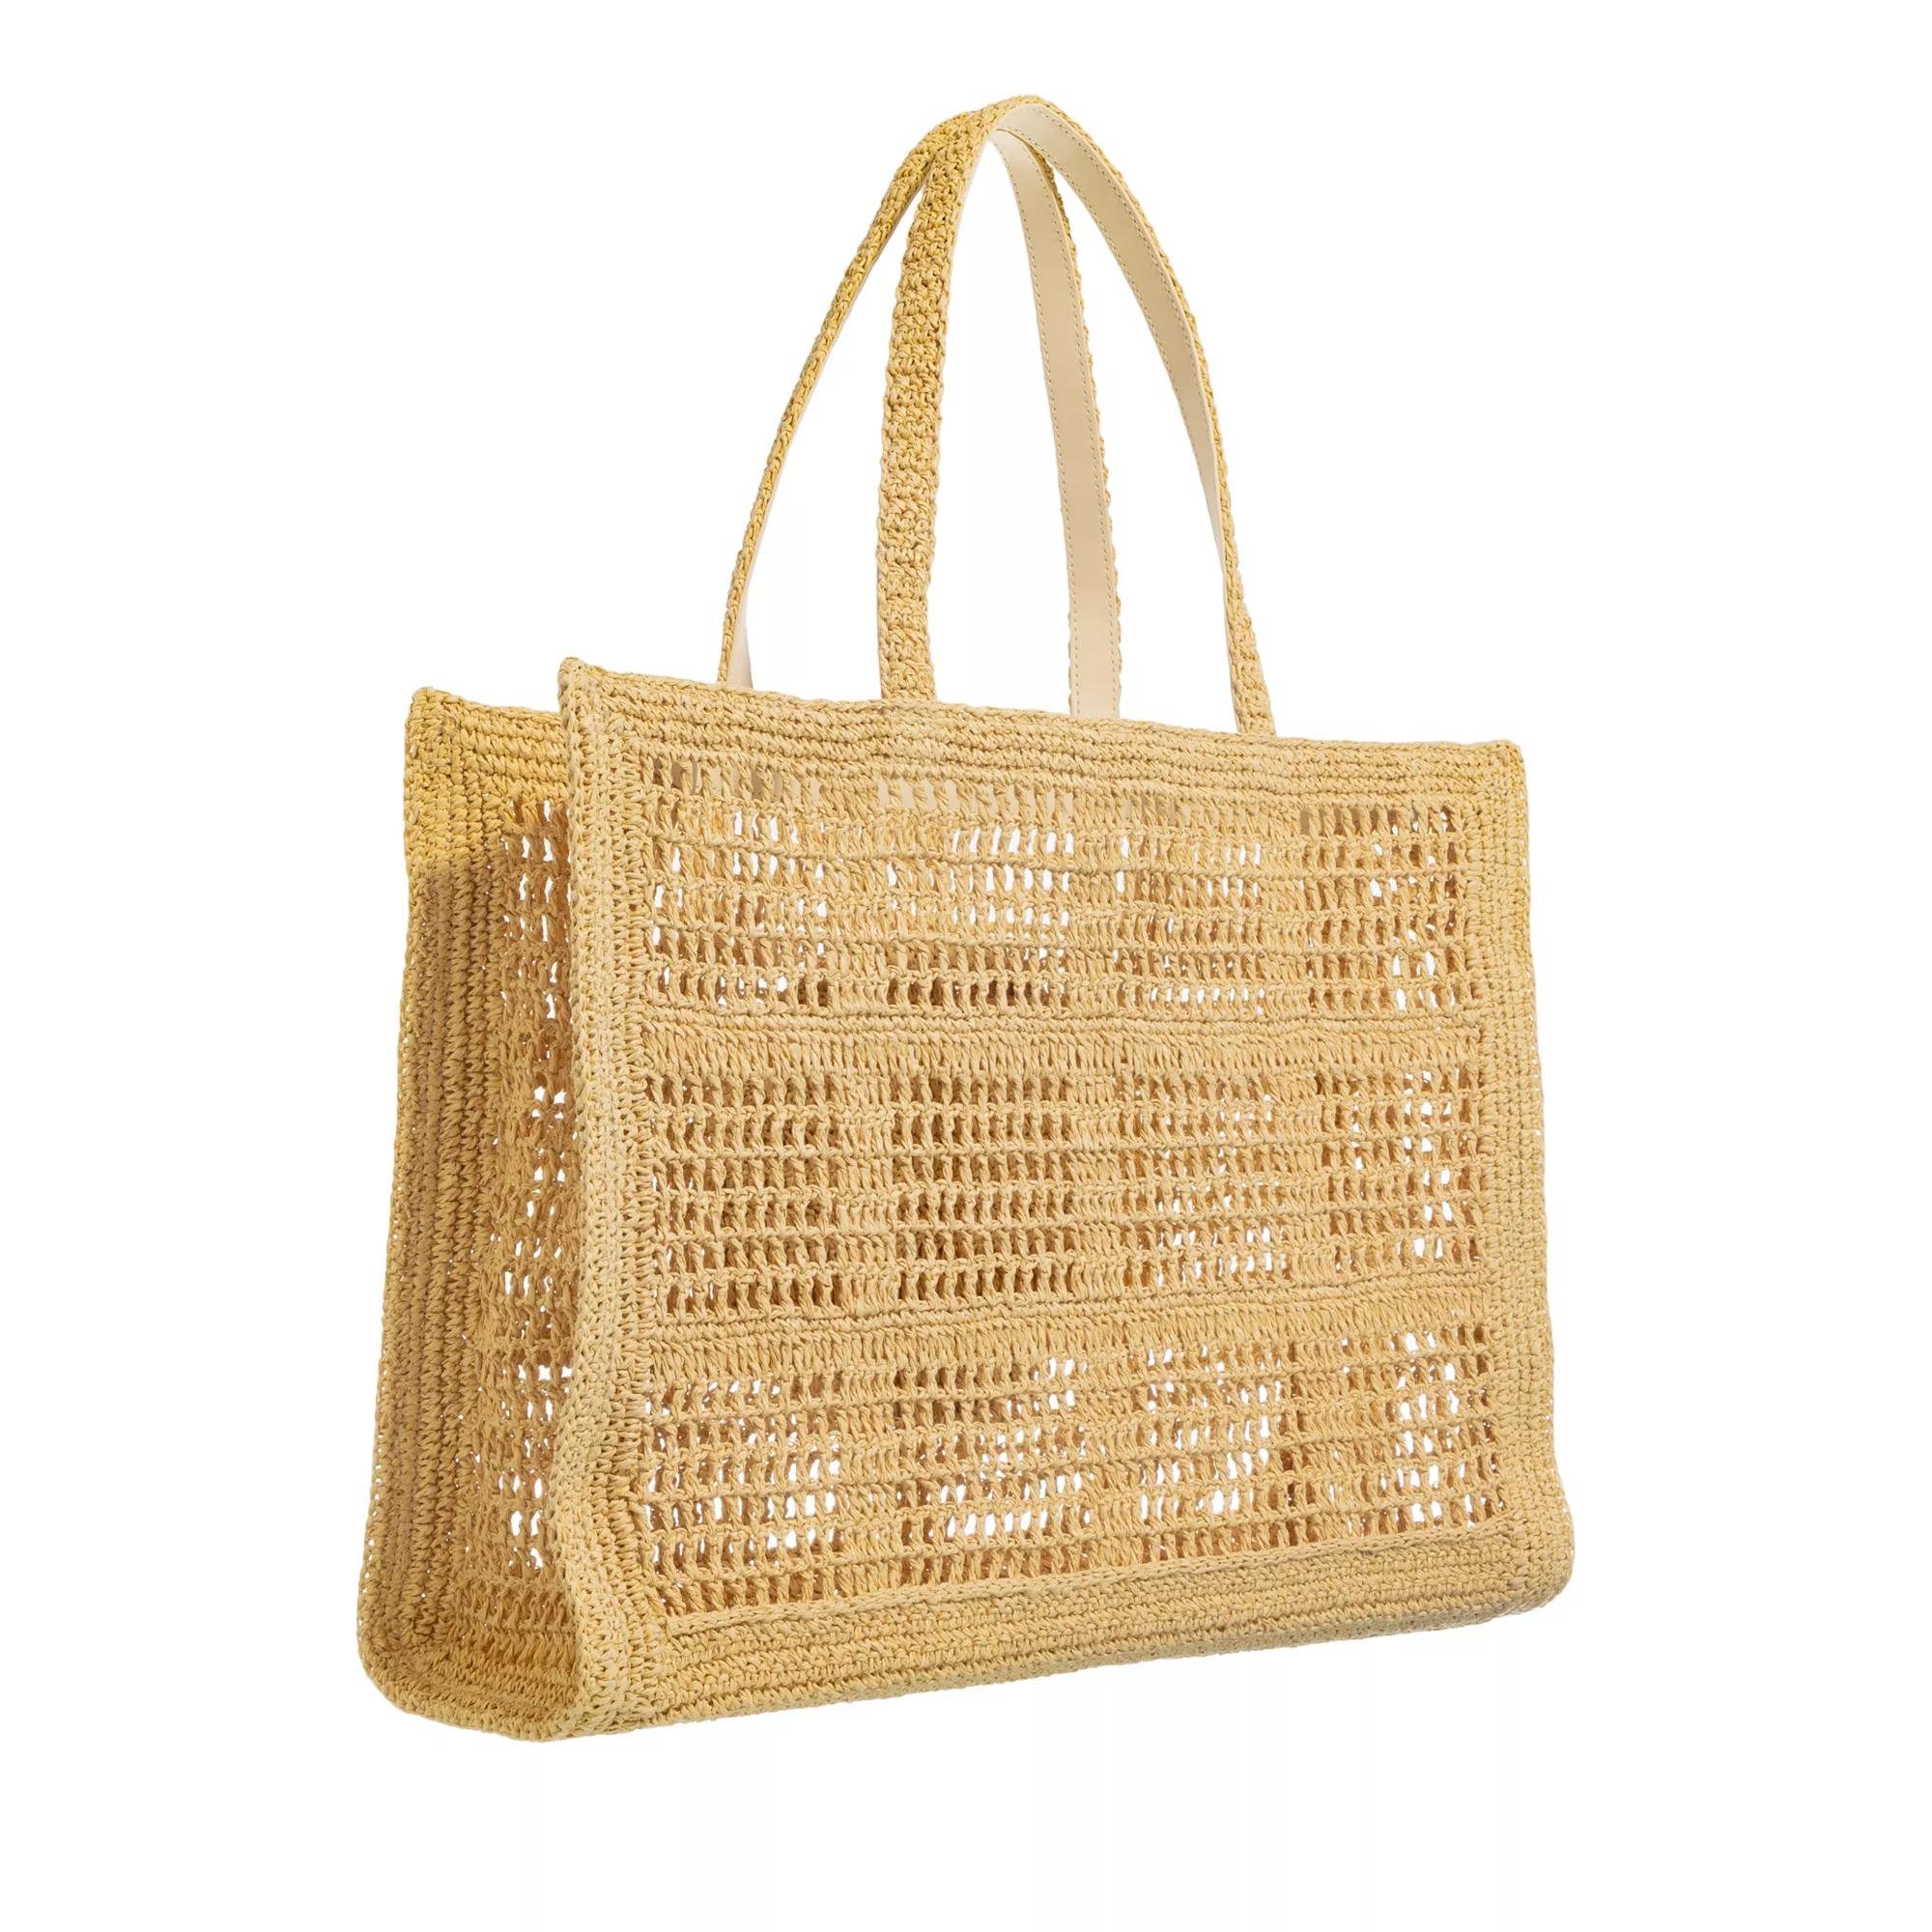 TORY BURCH Totes Ella Hand-Crocheted Large Tote in beige